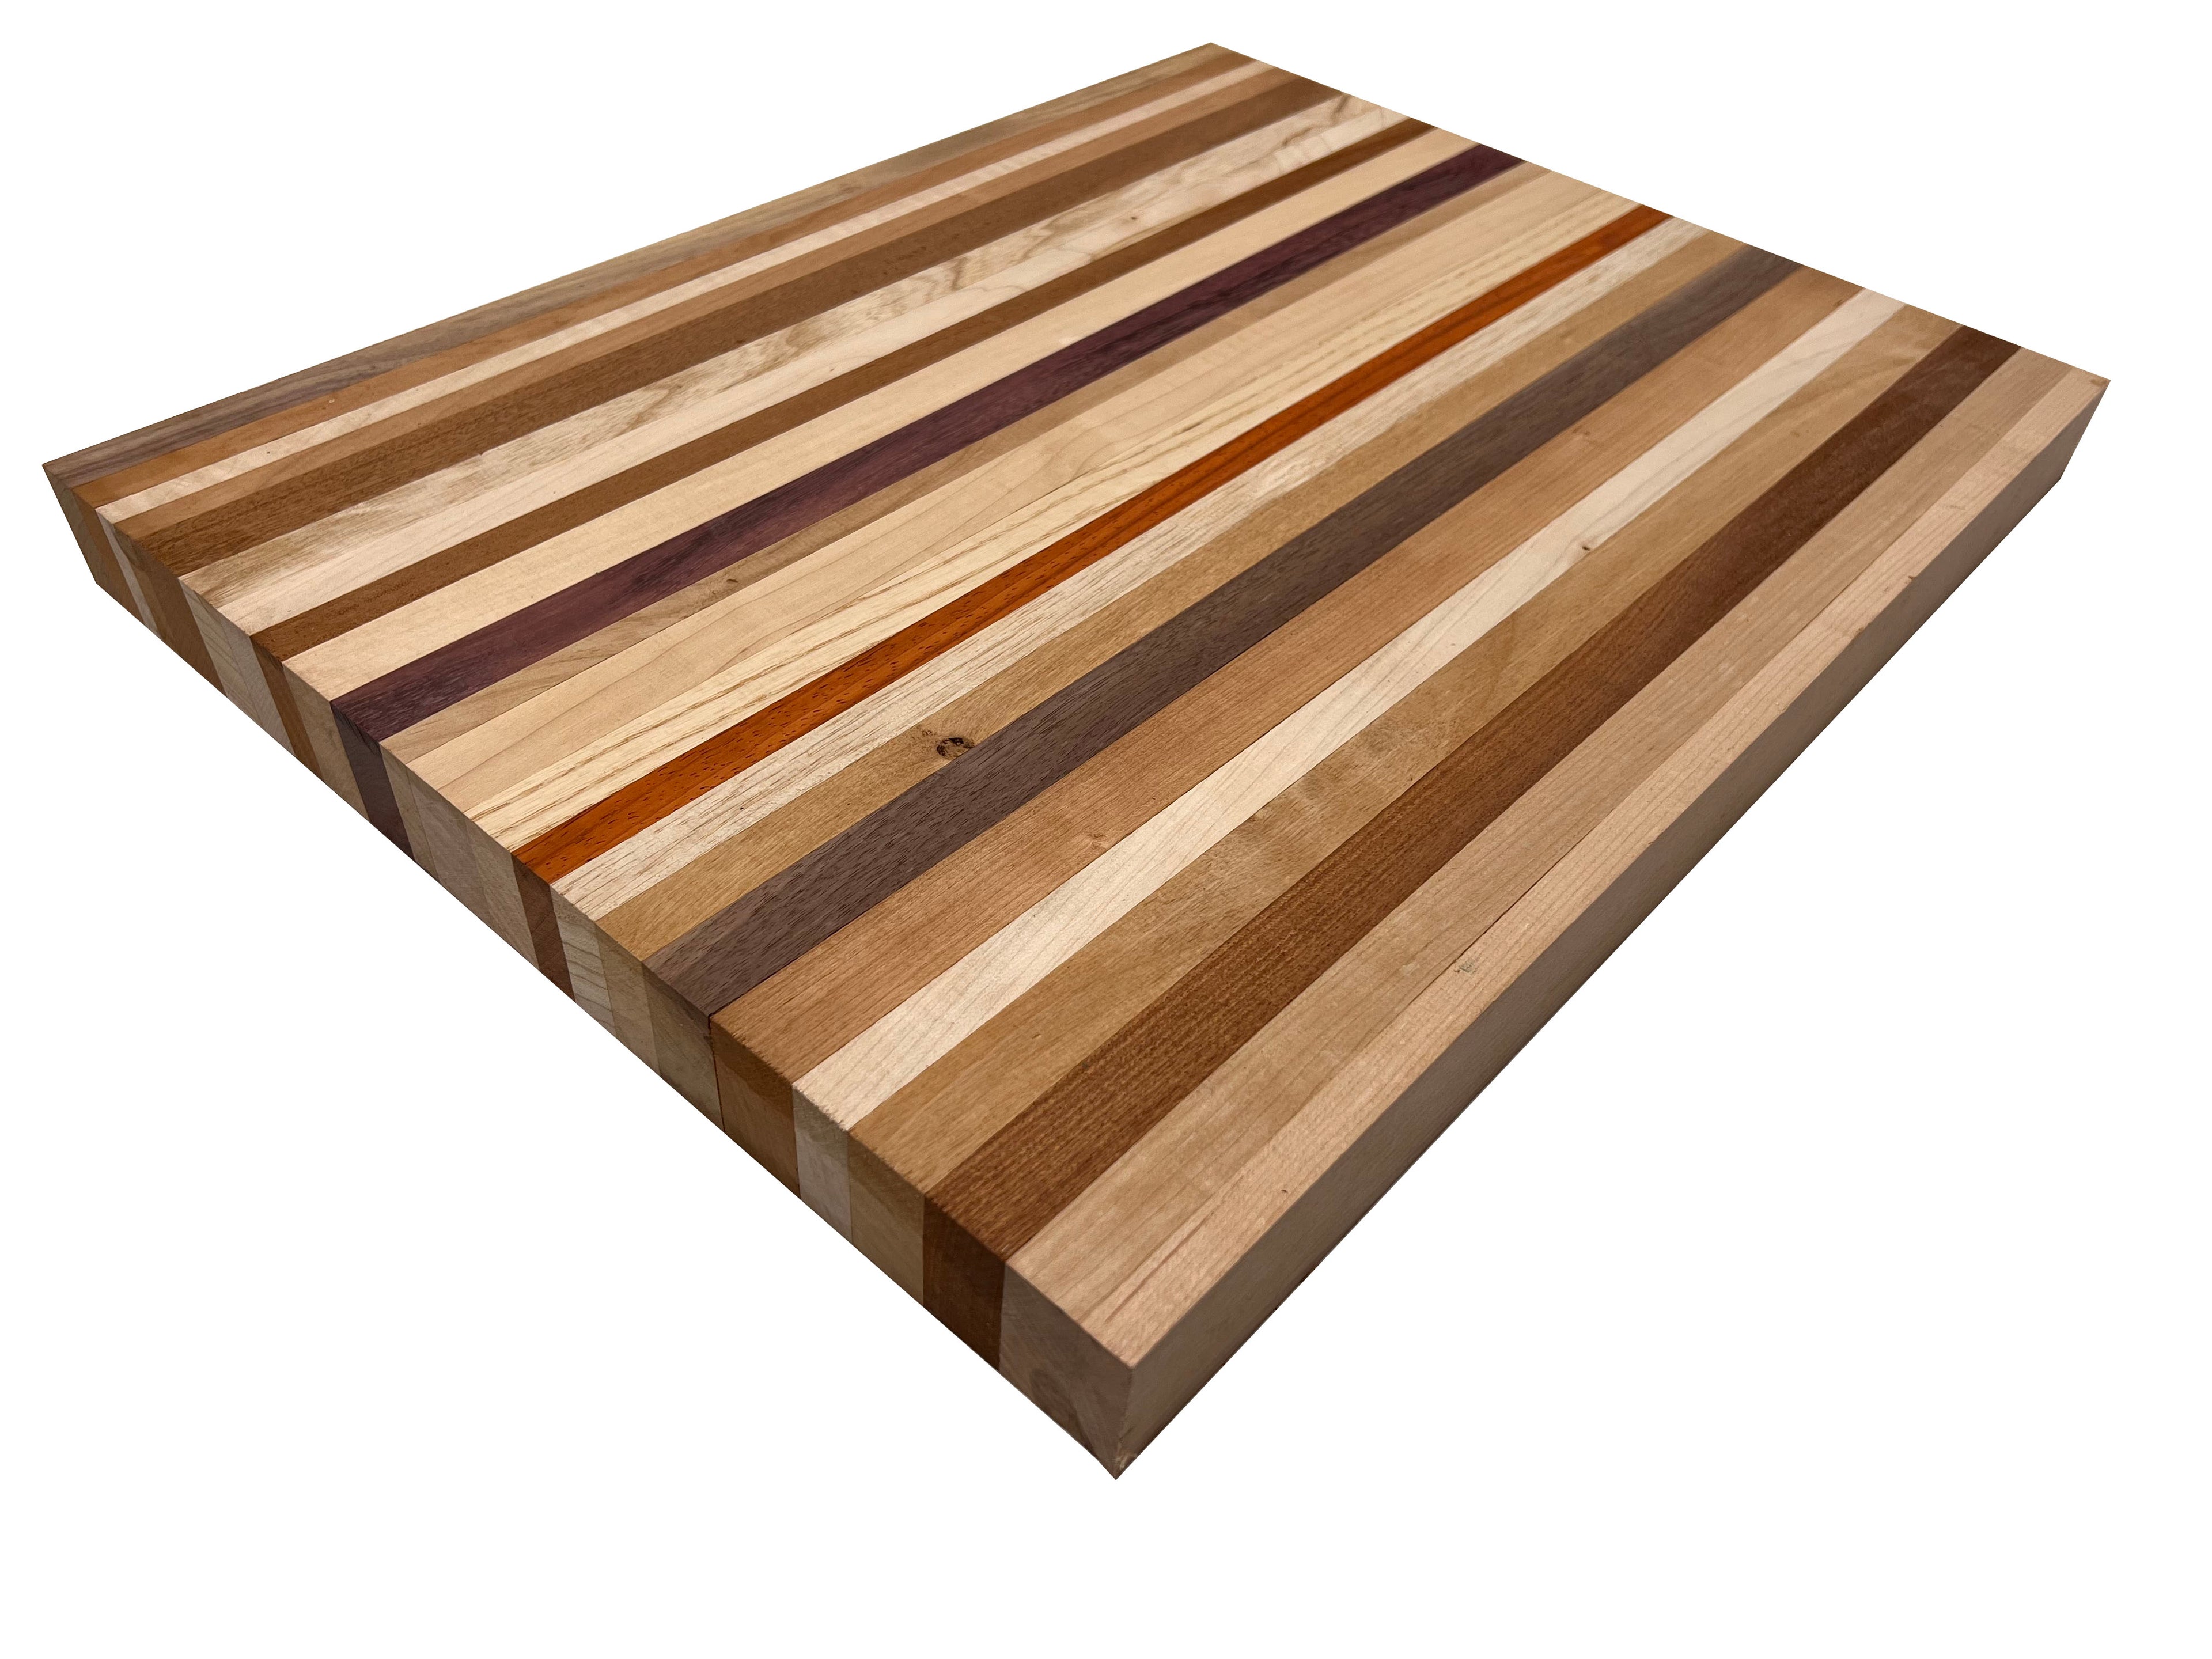 Handmade, wooden cutting boards and butcher blocks